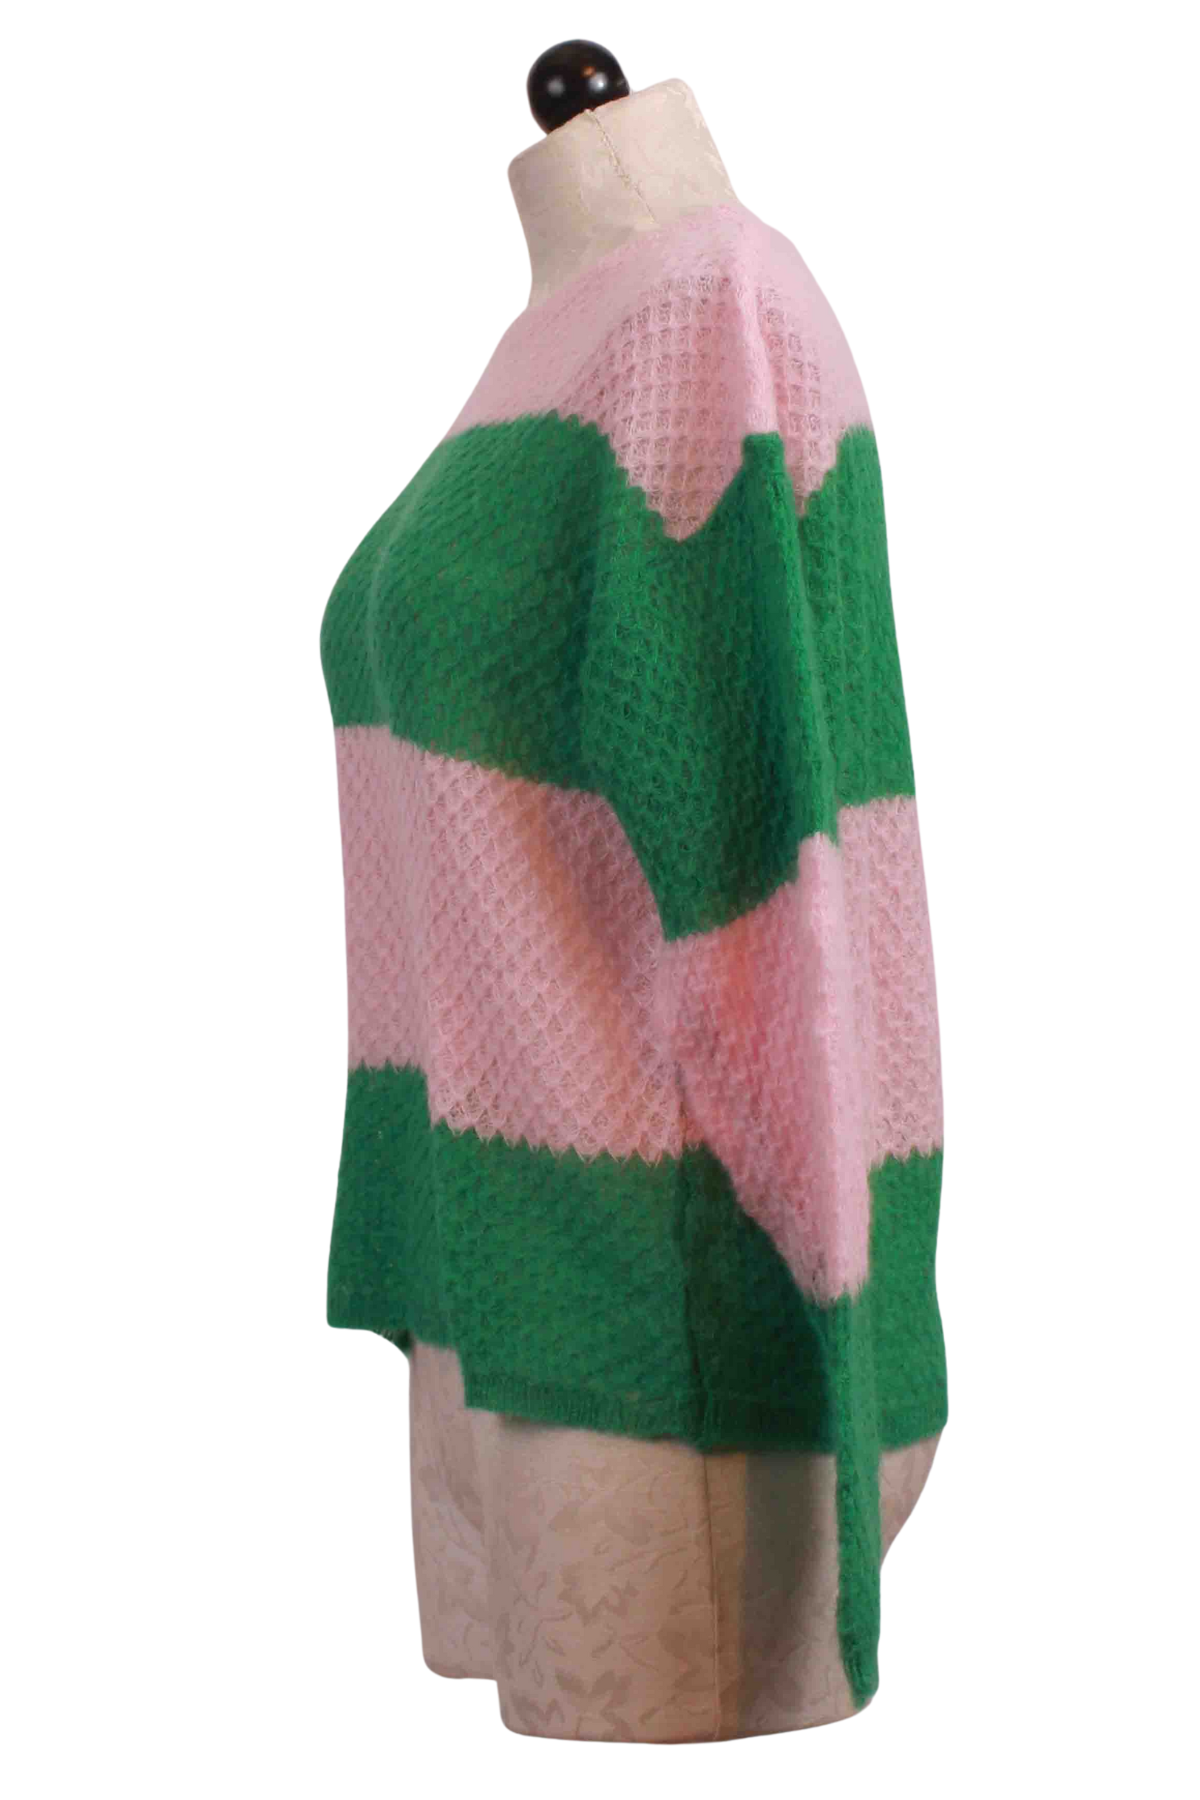 side view of Green and Pink Striped Gauzy Sweater by Compania Fantastica